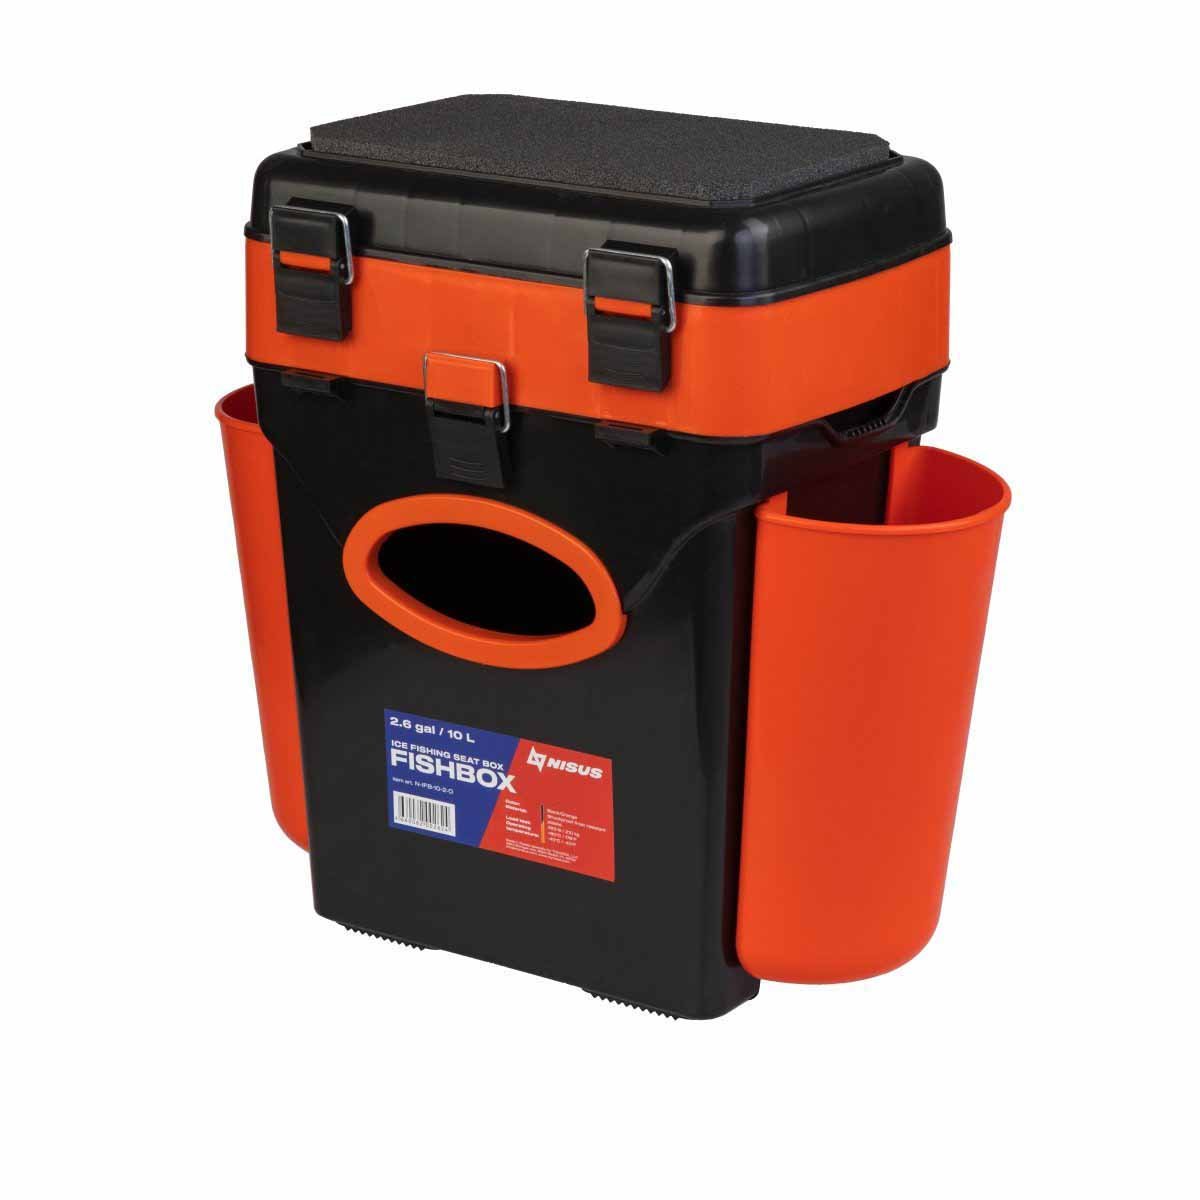 FishBox 10 liter SeatBox for Ice Fishing, 2 Compartments, Orange